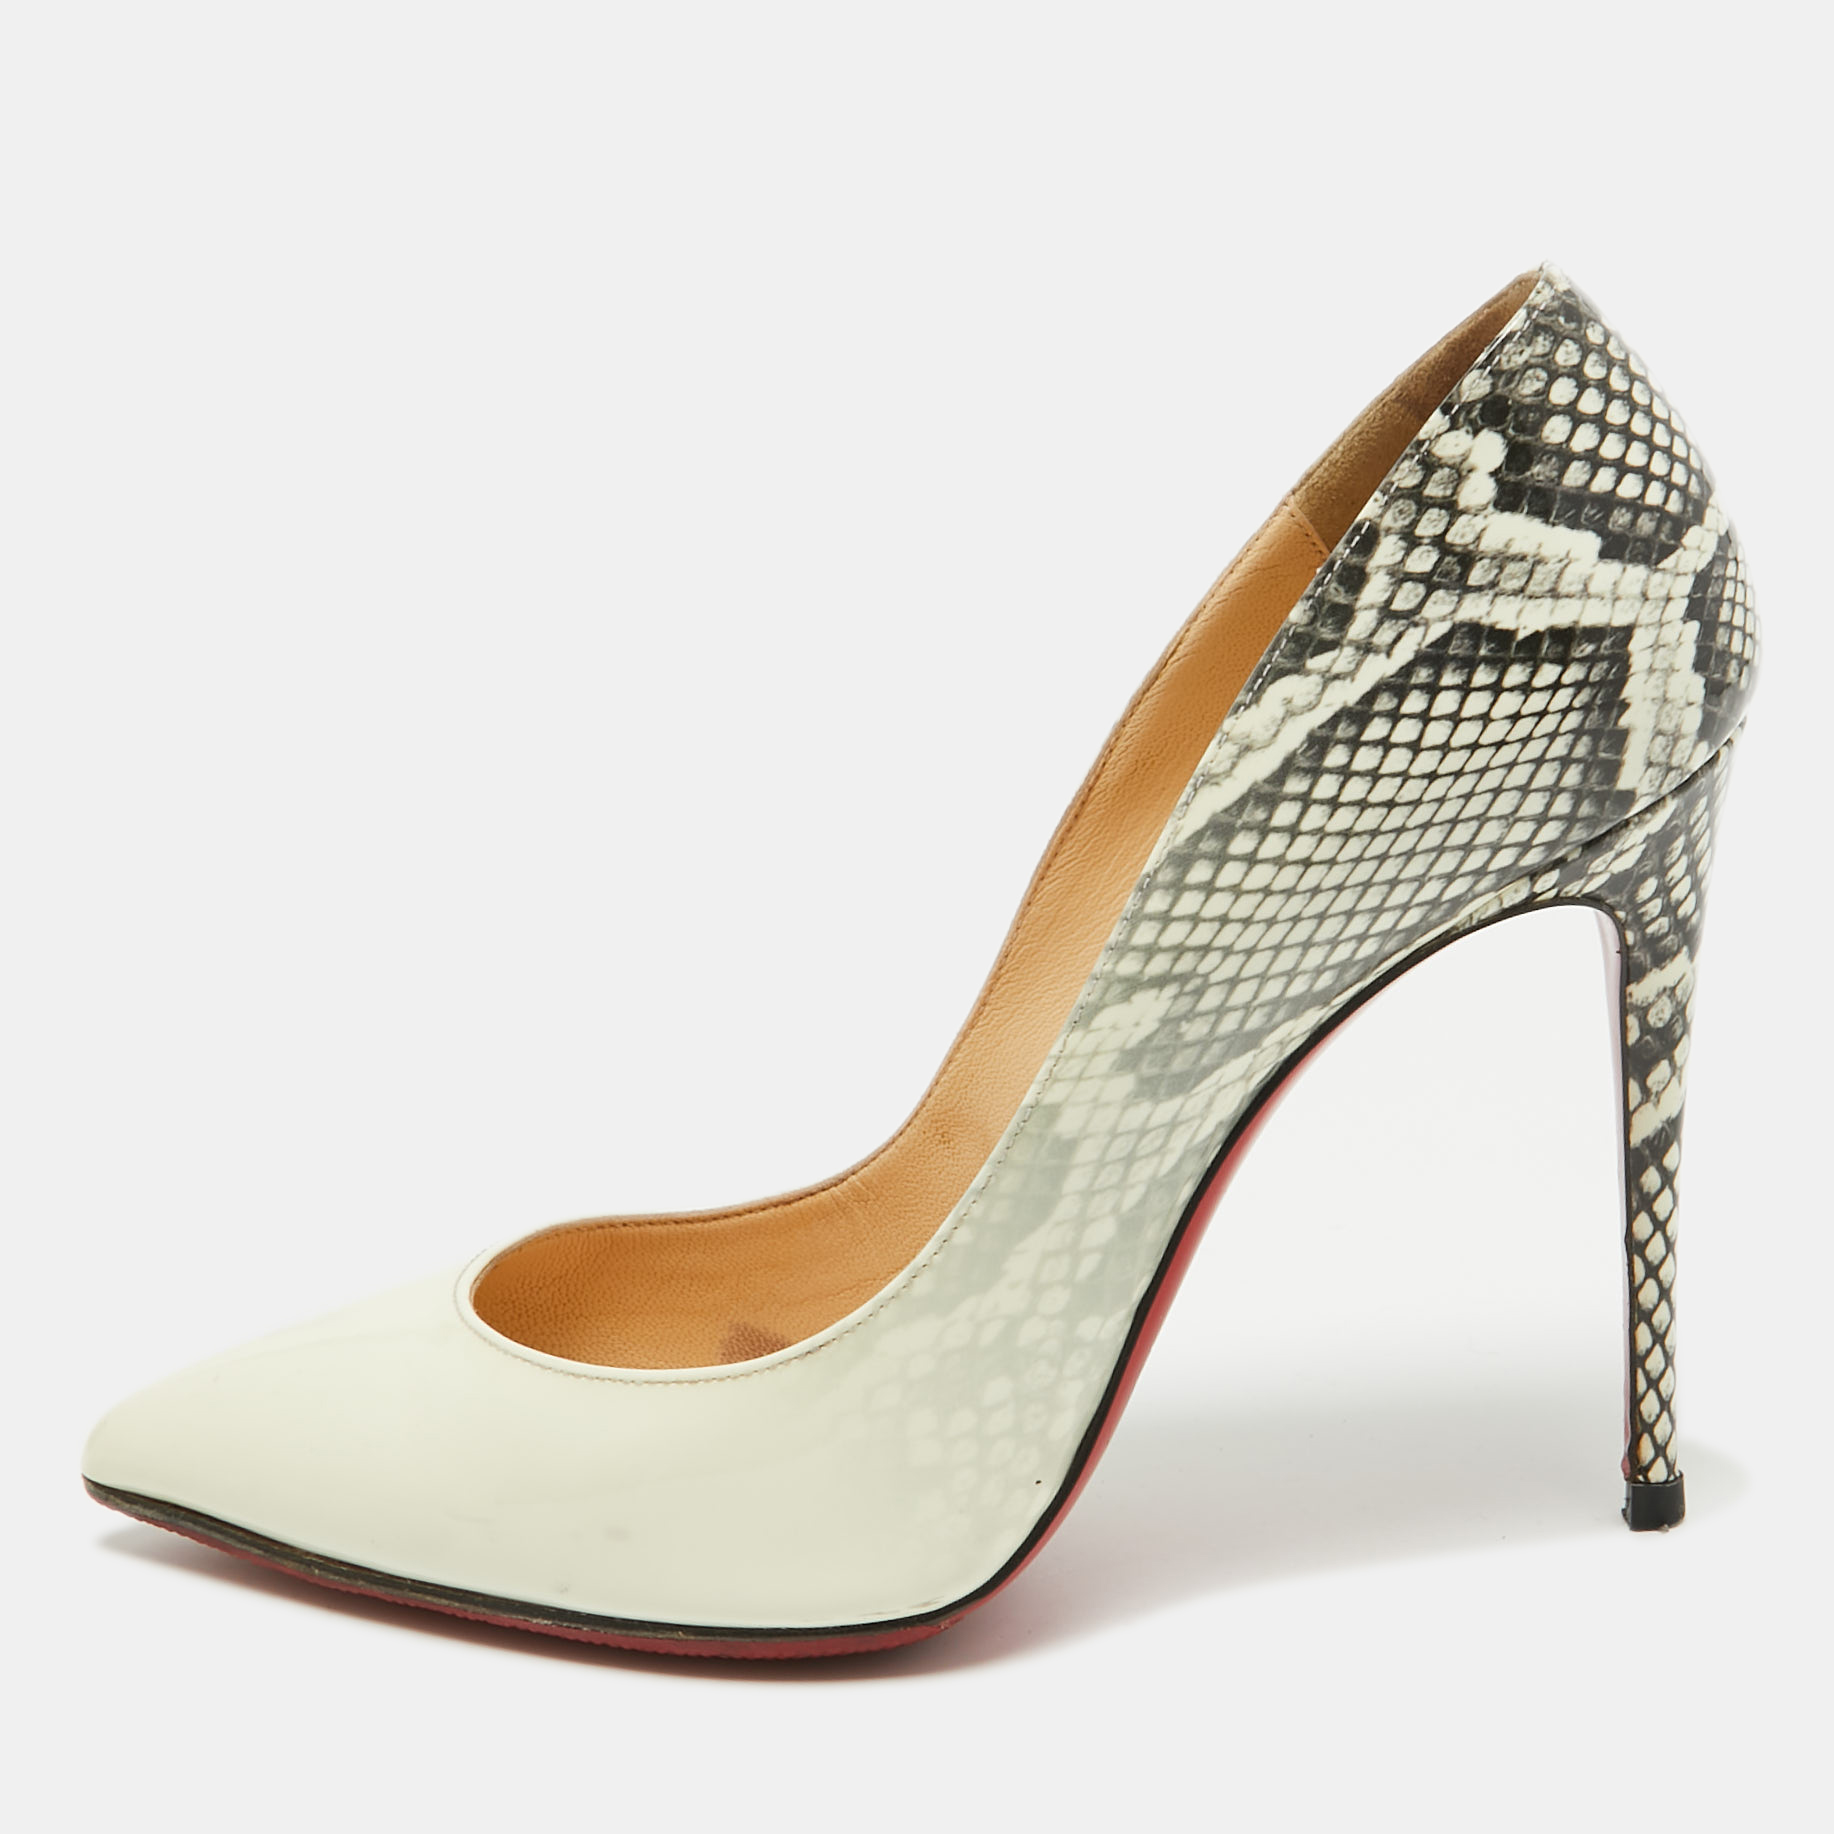 

Christian Louboutin Off White/Python Prints Patent Leather Pigalle Follies Pumps Size